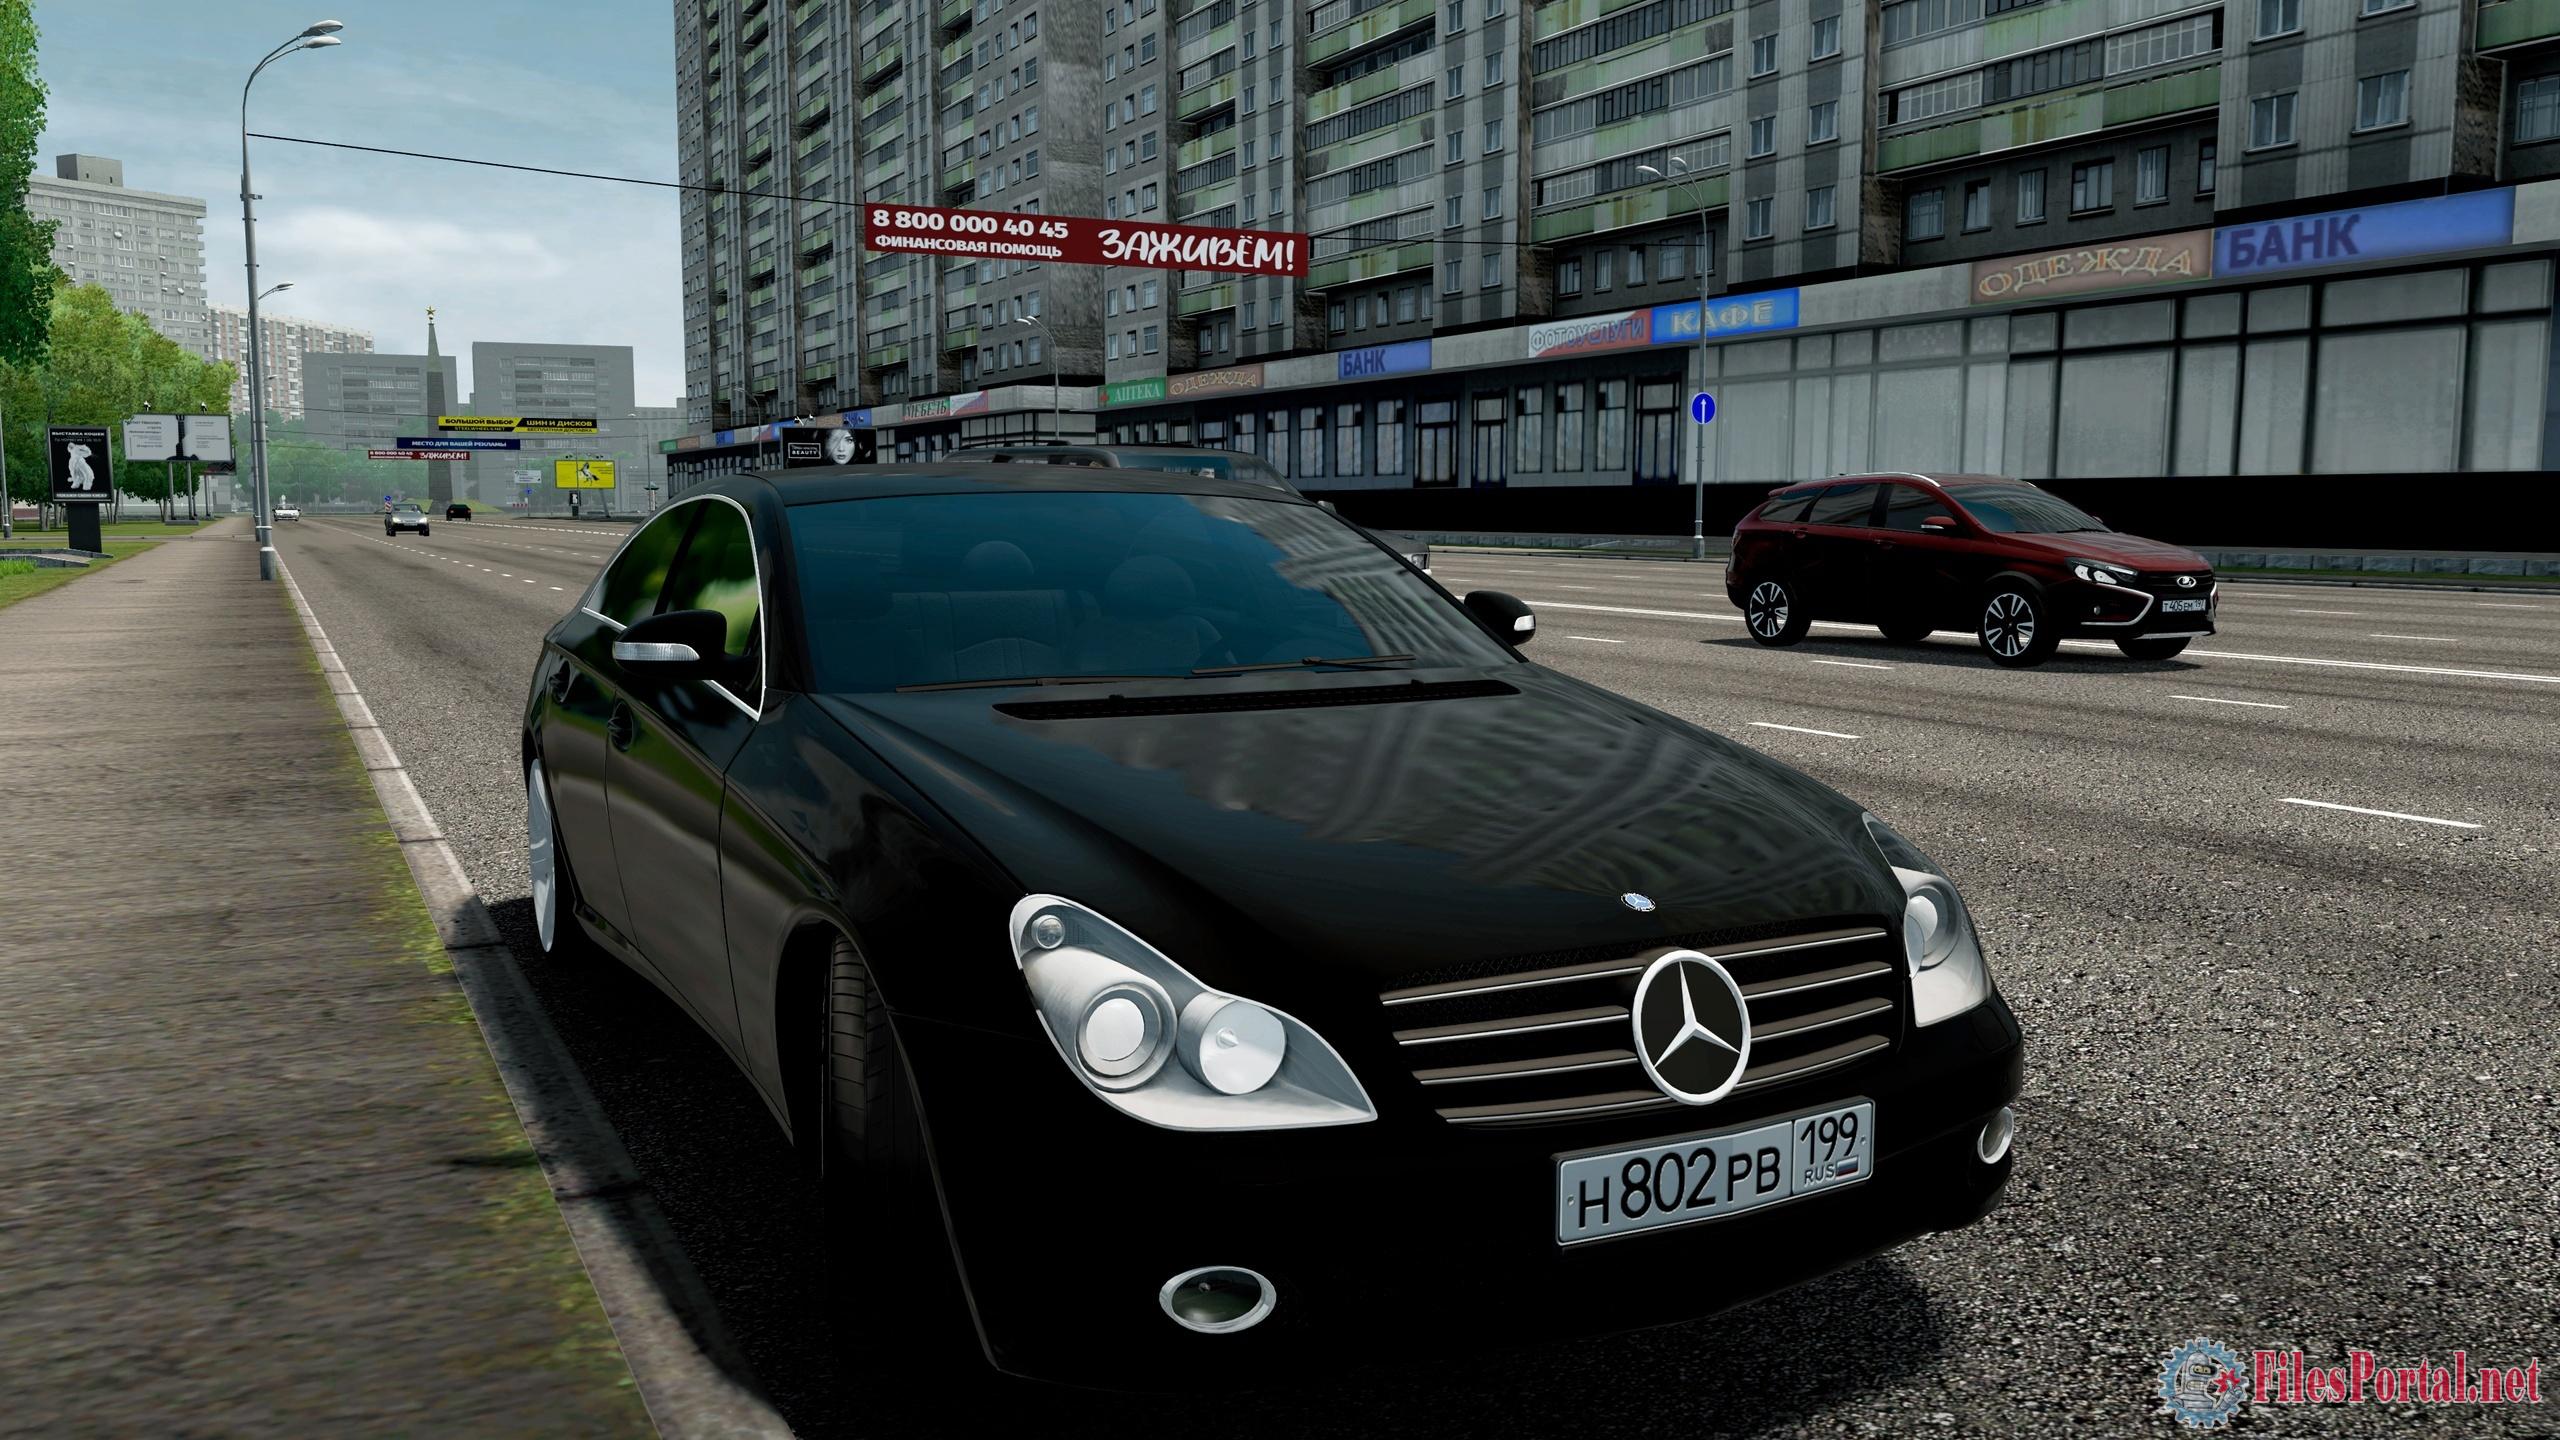 Мод на сити кар драйвинг cls. Mercedes Benz CLS w219 City car Driving. CLS 219 City car Driving. City car Driving Mercedes w219. CLS 2015 City car Driving.